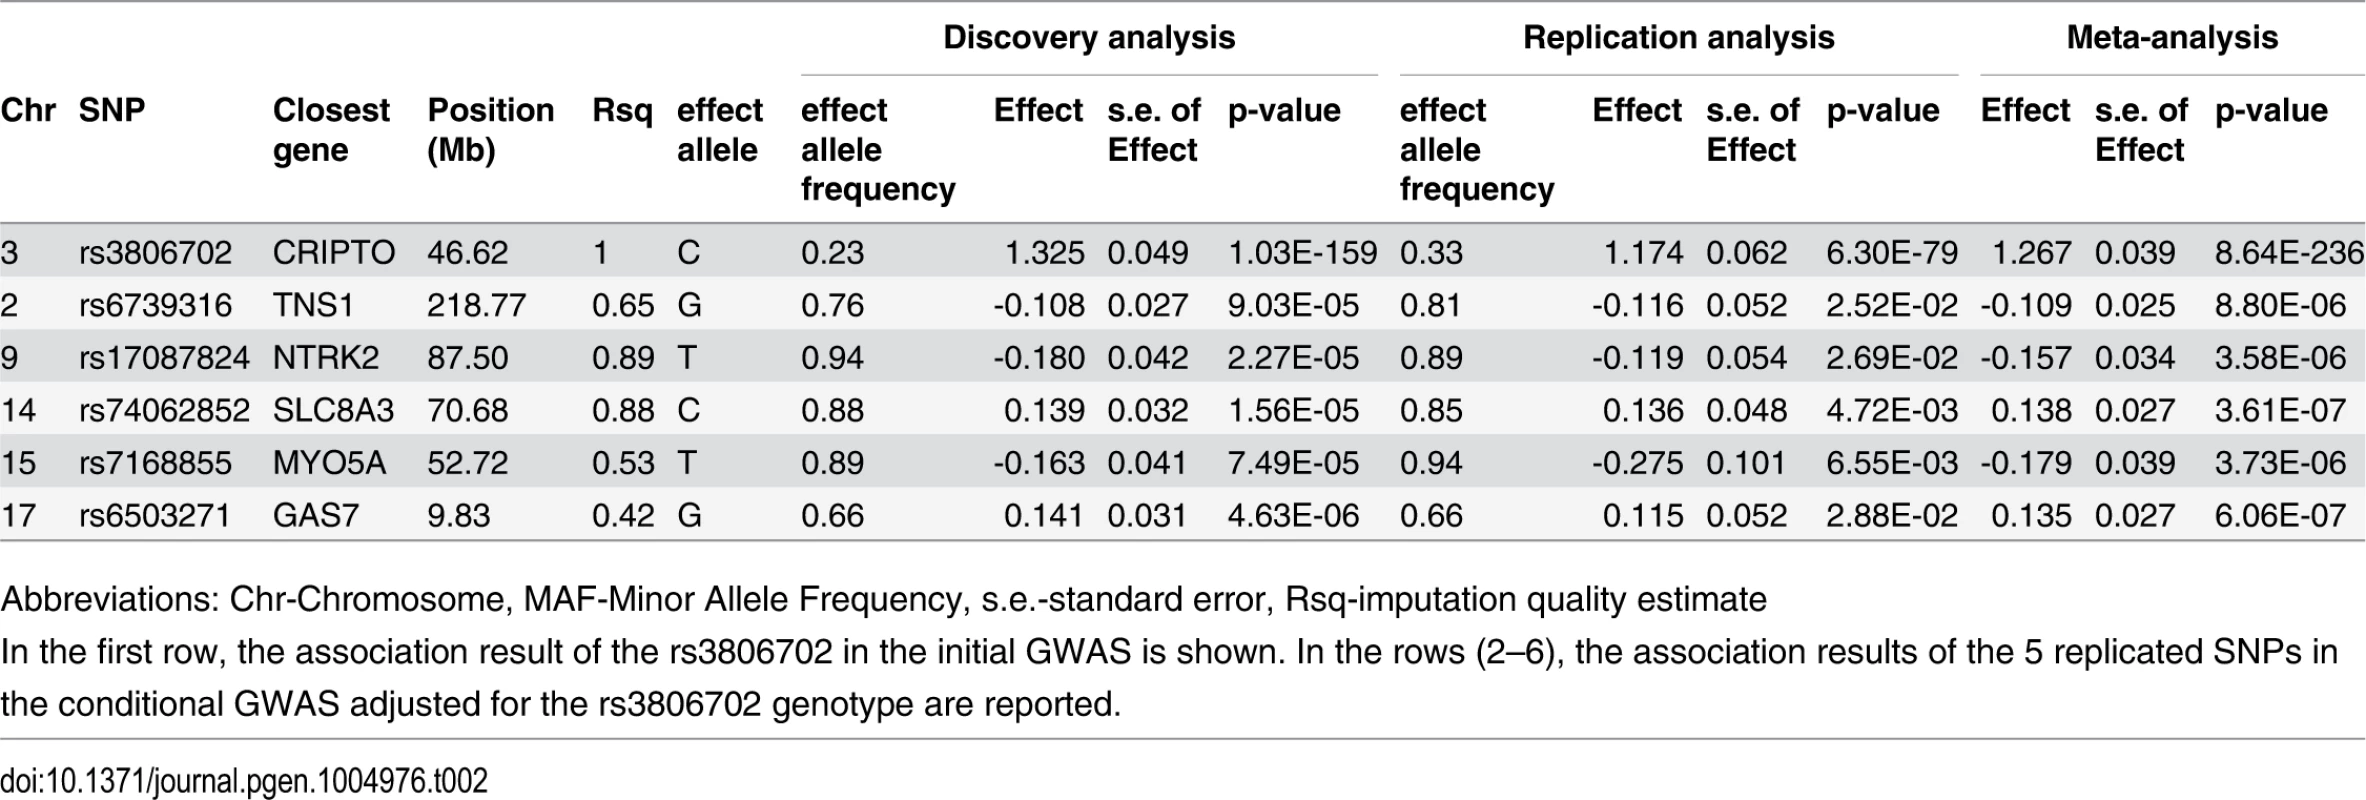 Association results of replicated SNPs.